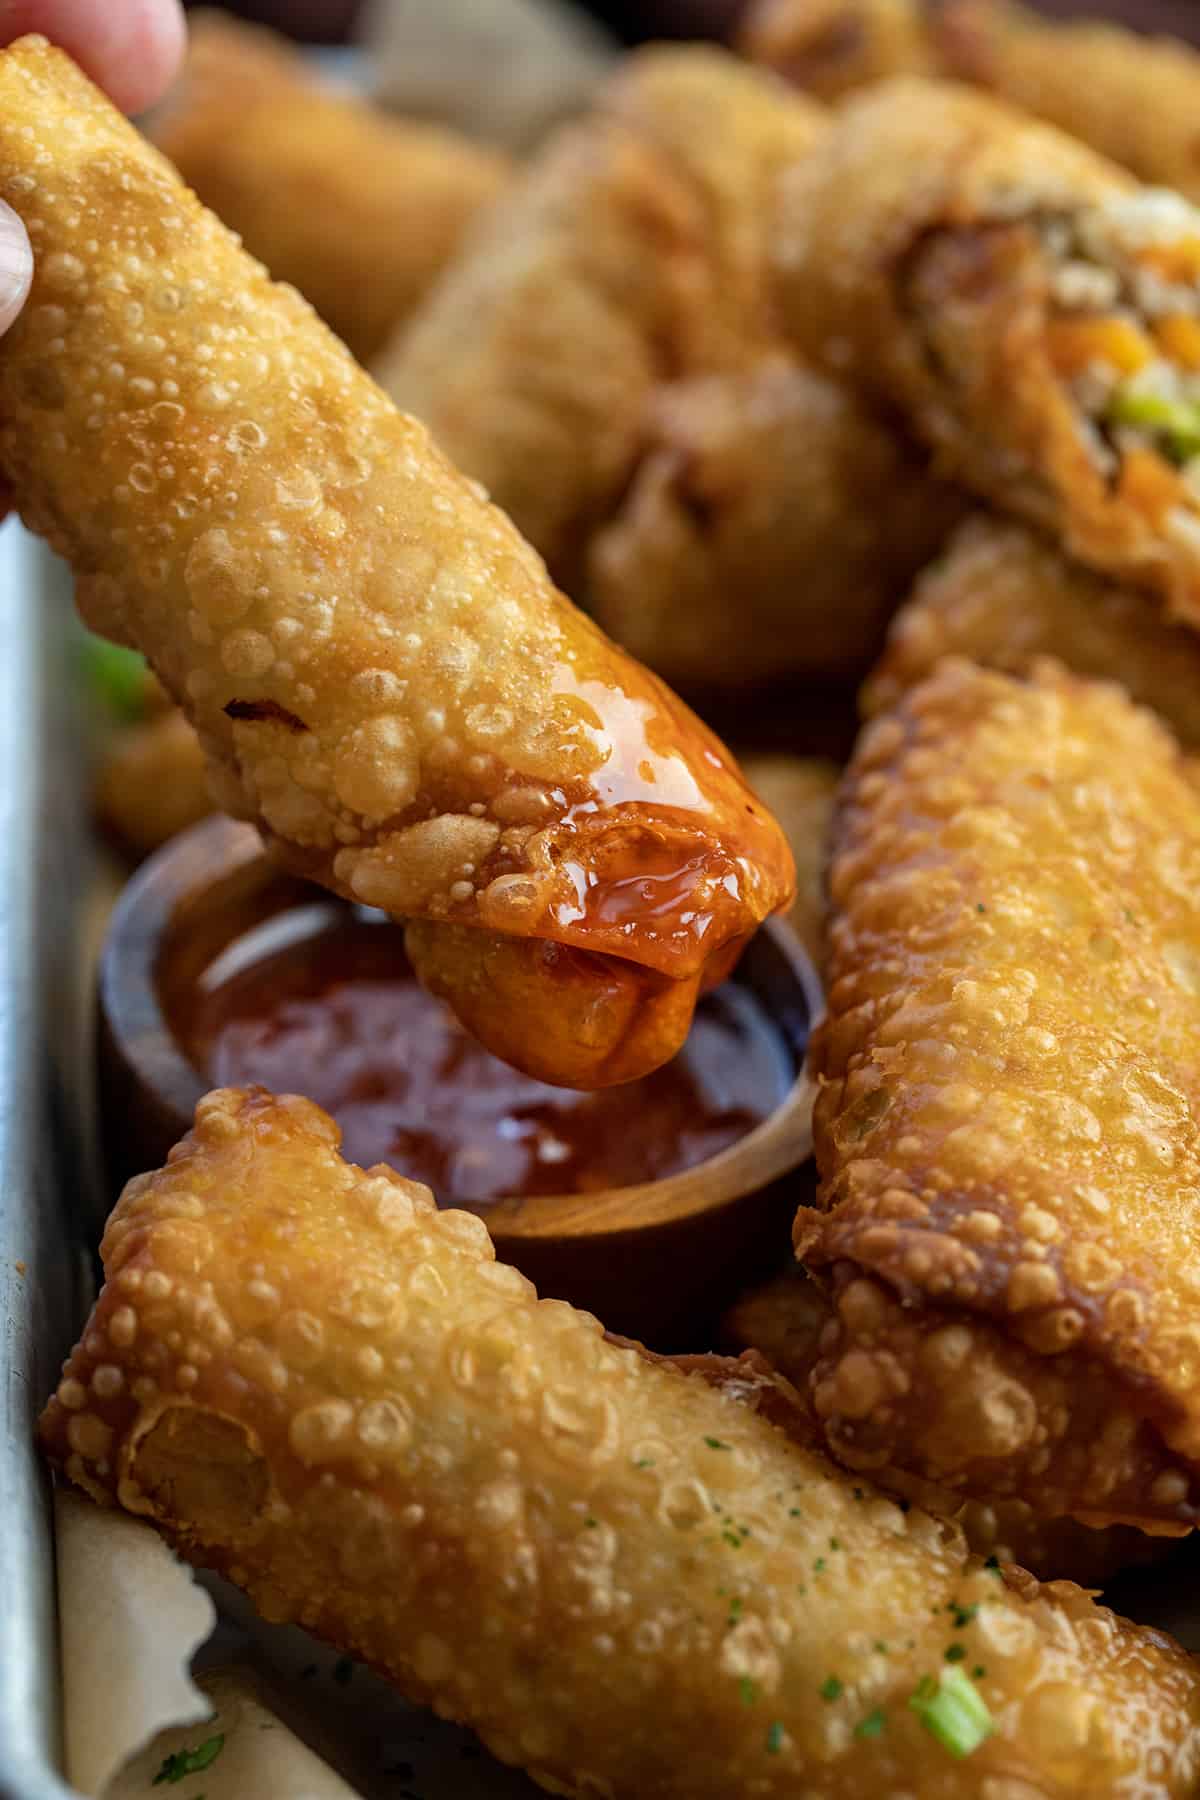 Dipping a Homemade Egg Roll into Sweet Chili Sauce.